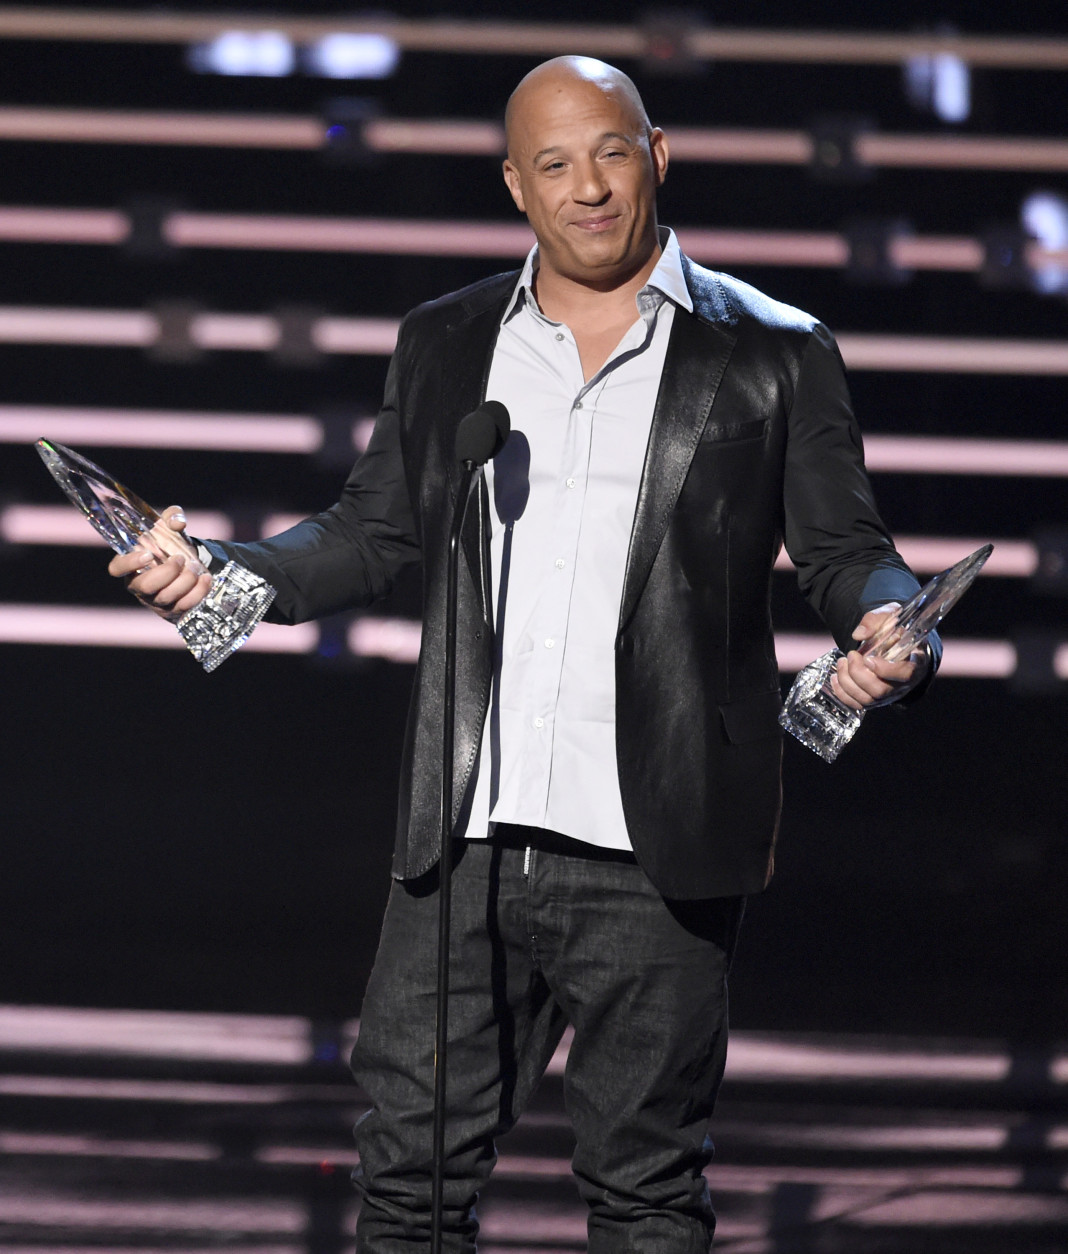 Vin Diesel accepts the award for favorite movie for Furious 7 at the People's Choice Awards at the Microsoft Theater on Wednesday, Jan. 6, 2016, in Los Angeles. (Photo by Chris Pizzello/Invision/AP)